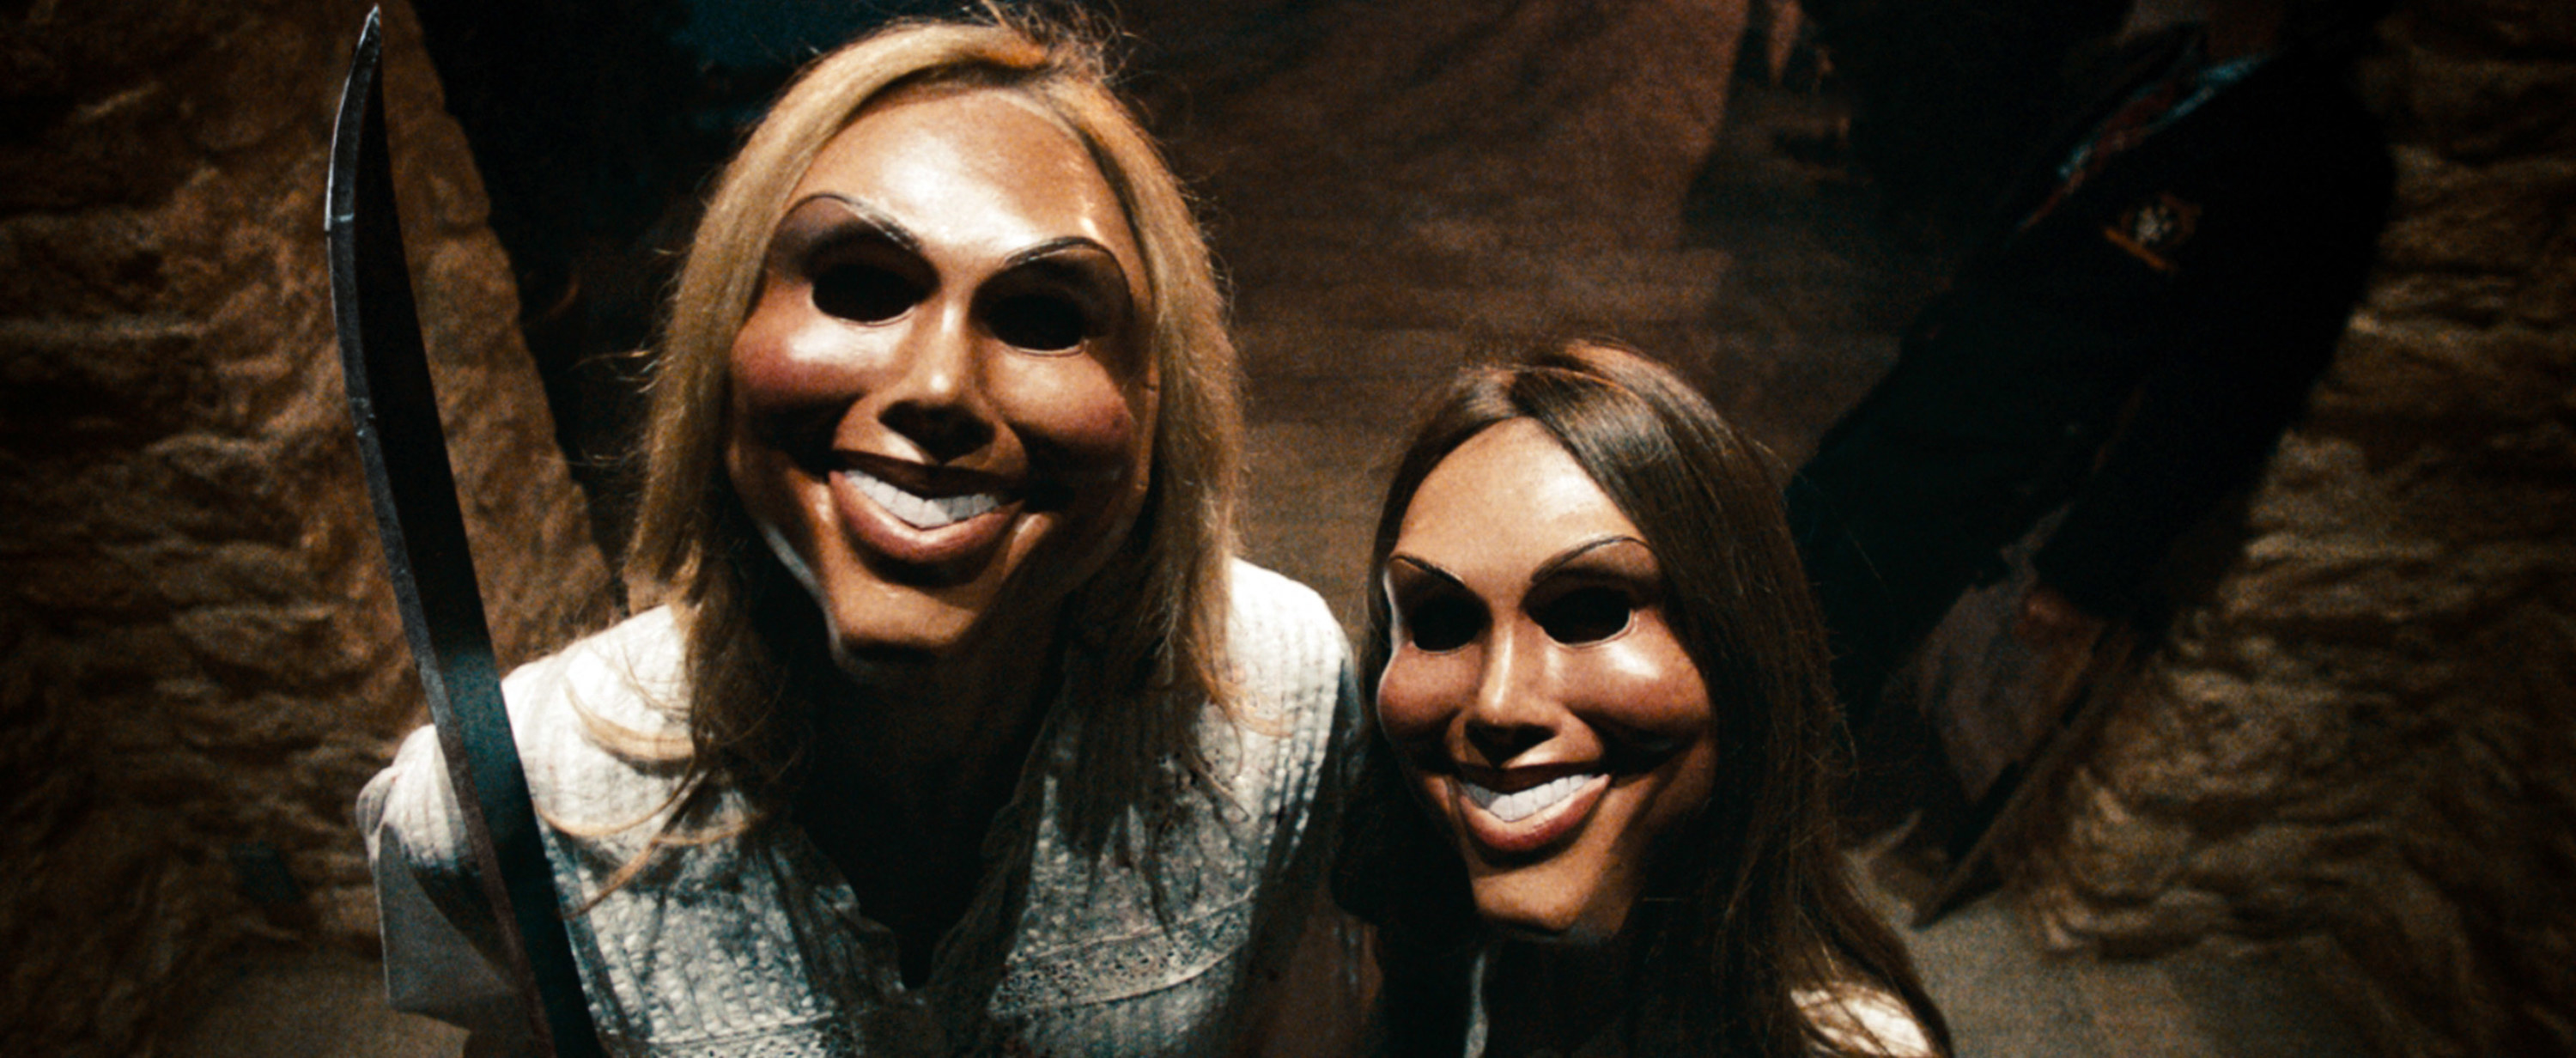 Two people in creepy masks and machetes in the purge